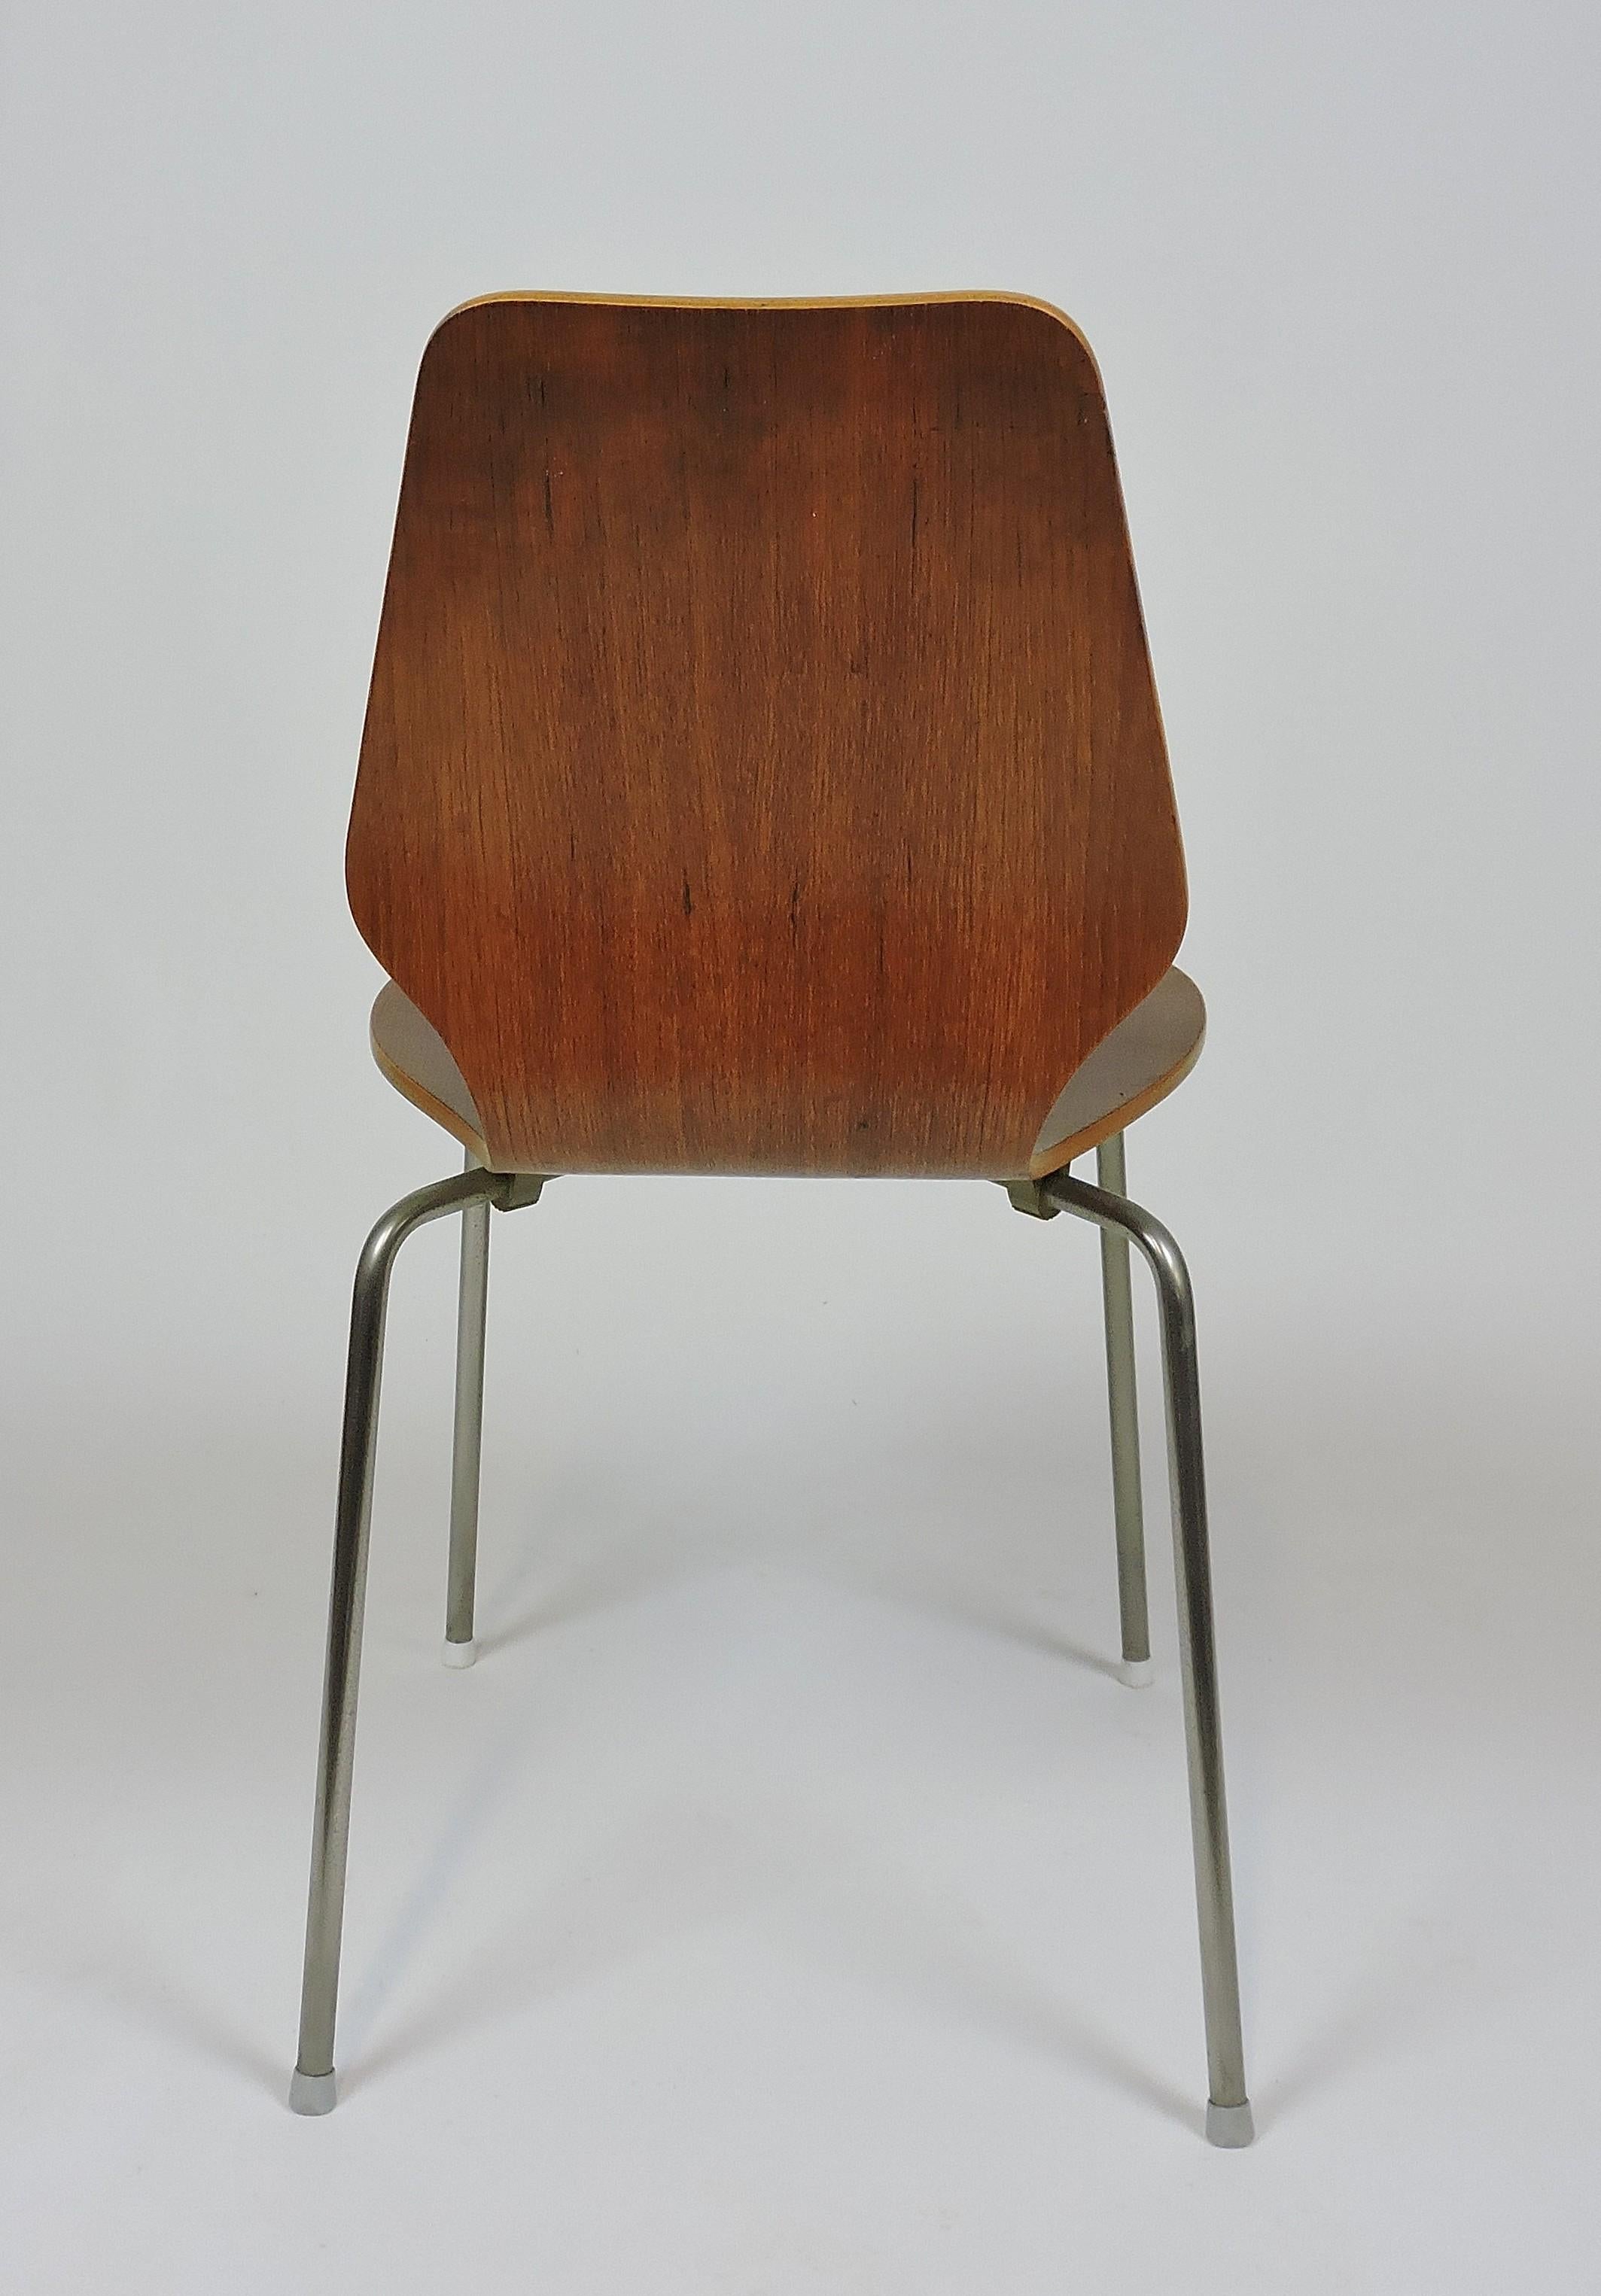 Laminated Midcentury Danish Modern Bentwood Dining, Side or Desk Chair For Sale